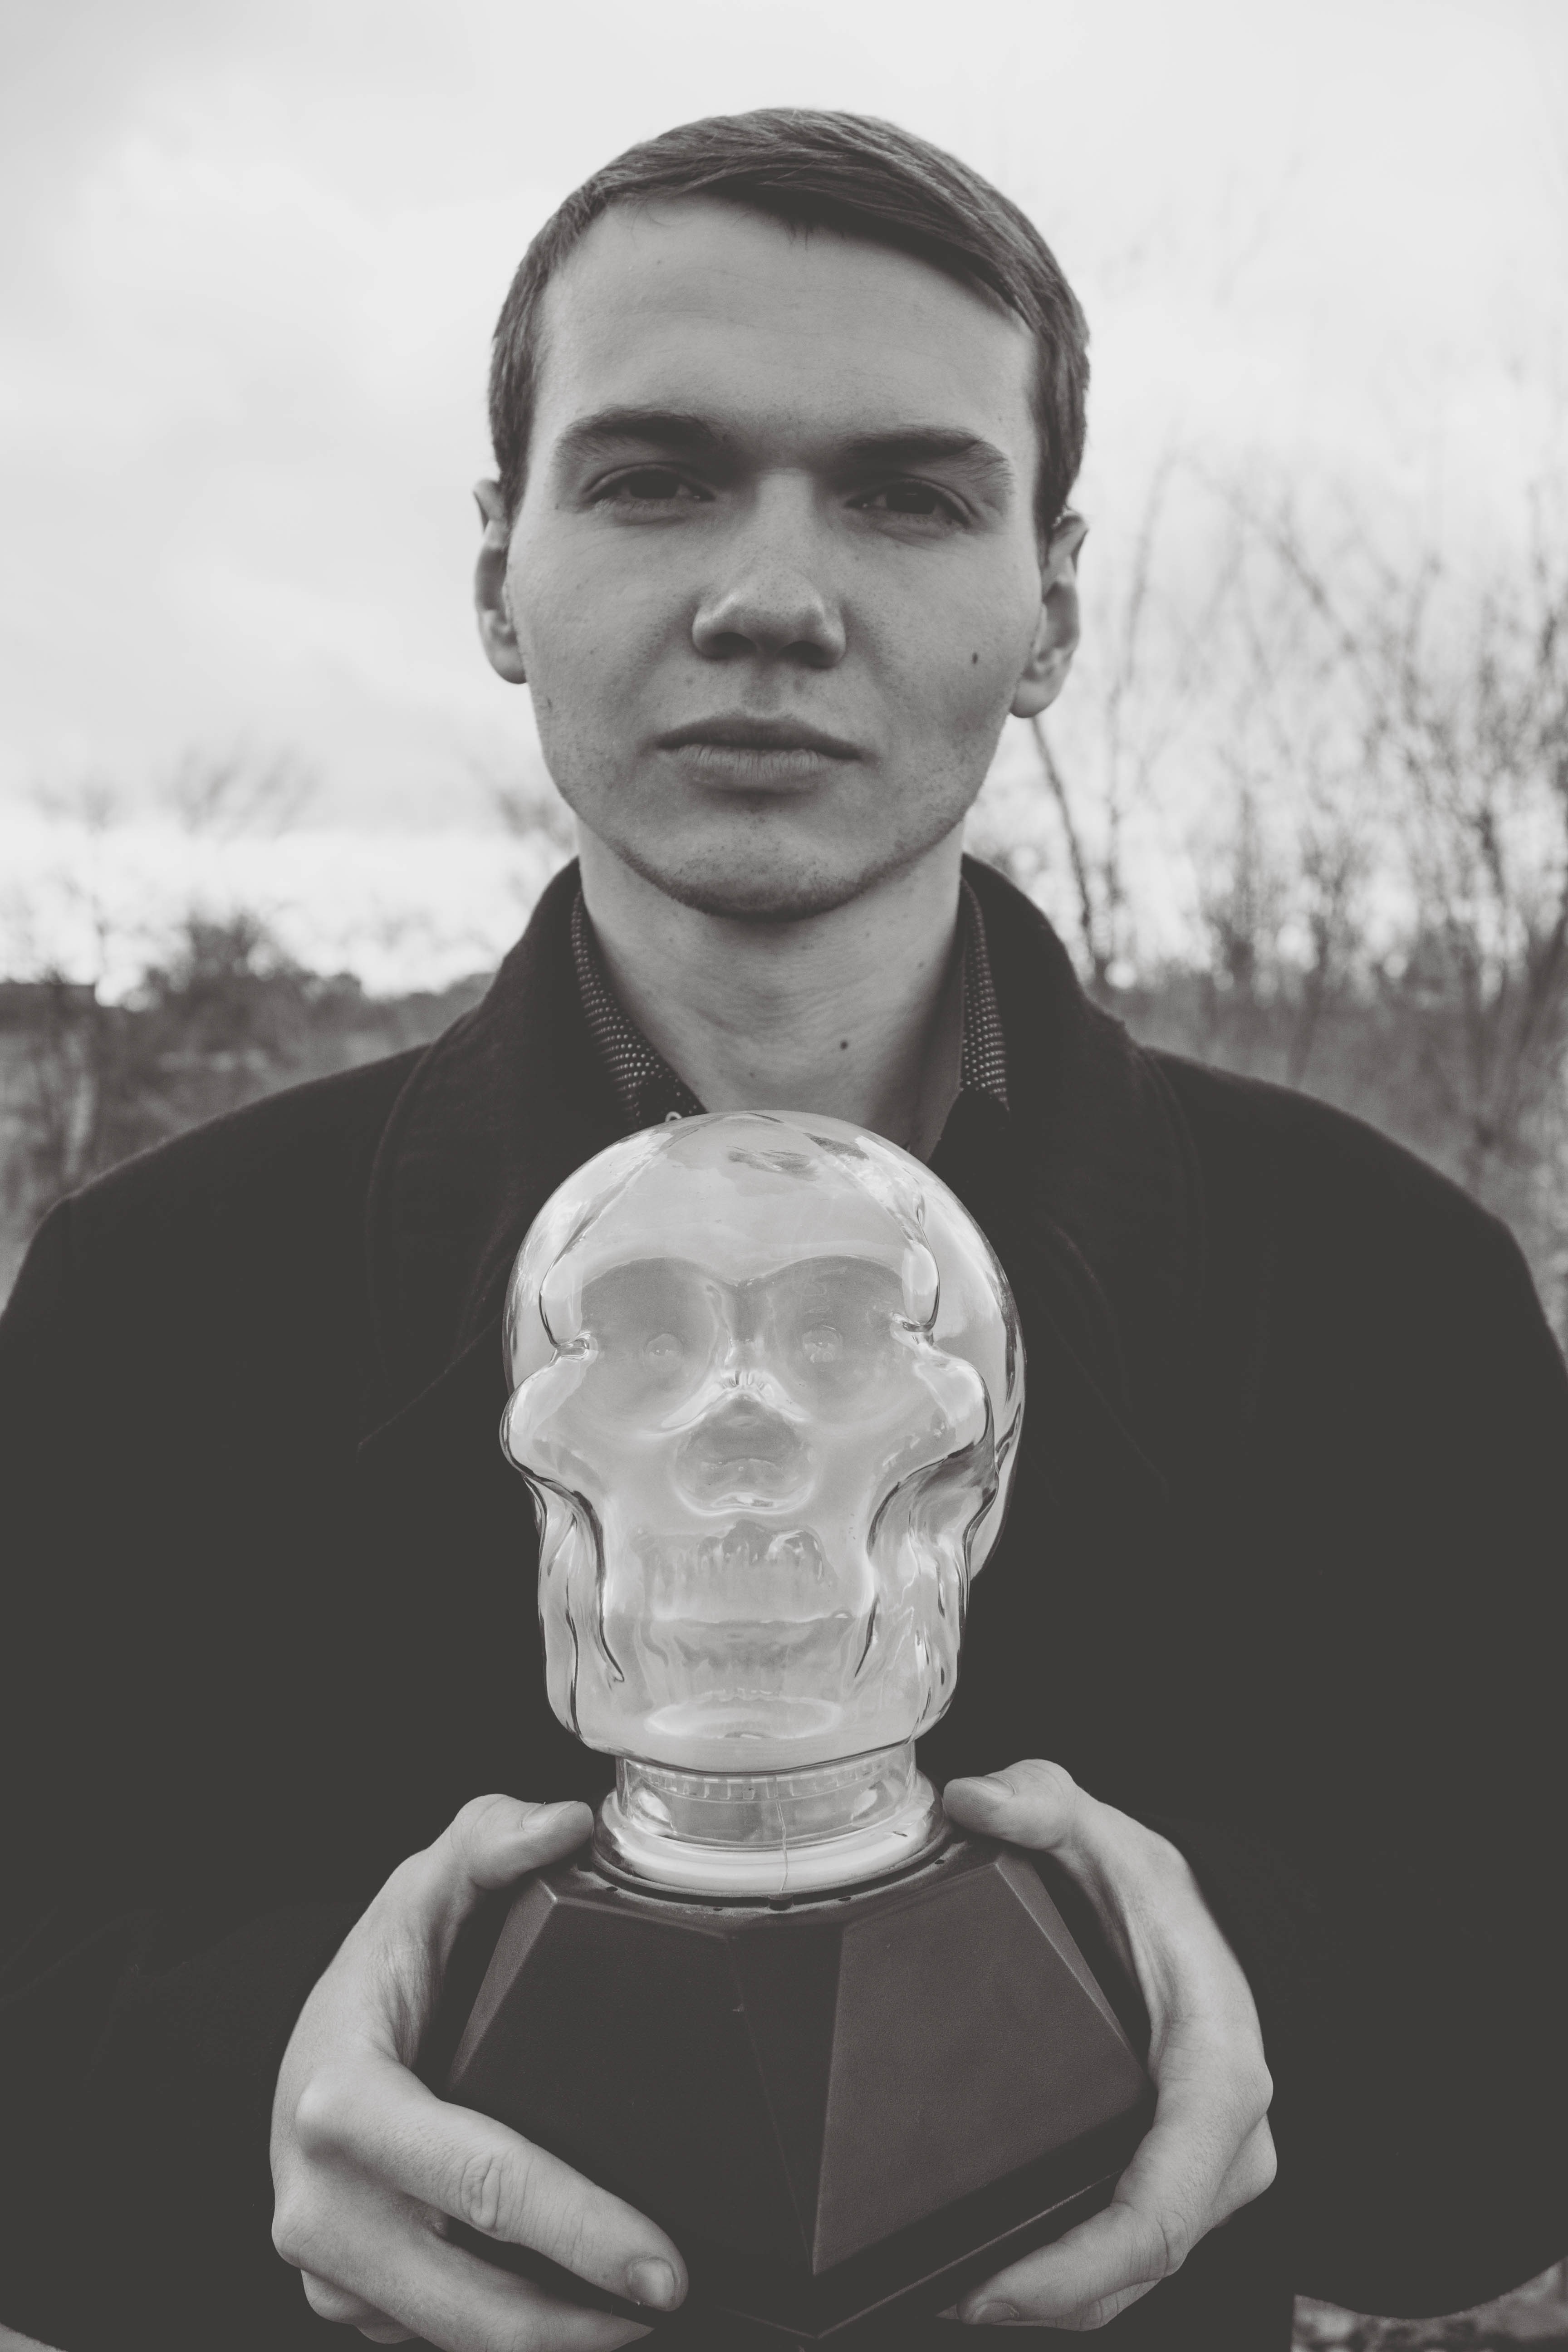 grayscale photo of a man in jacket holding a glass skull figurine during daytime